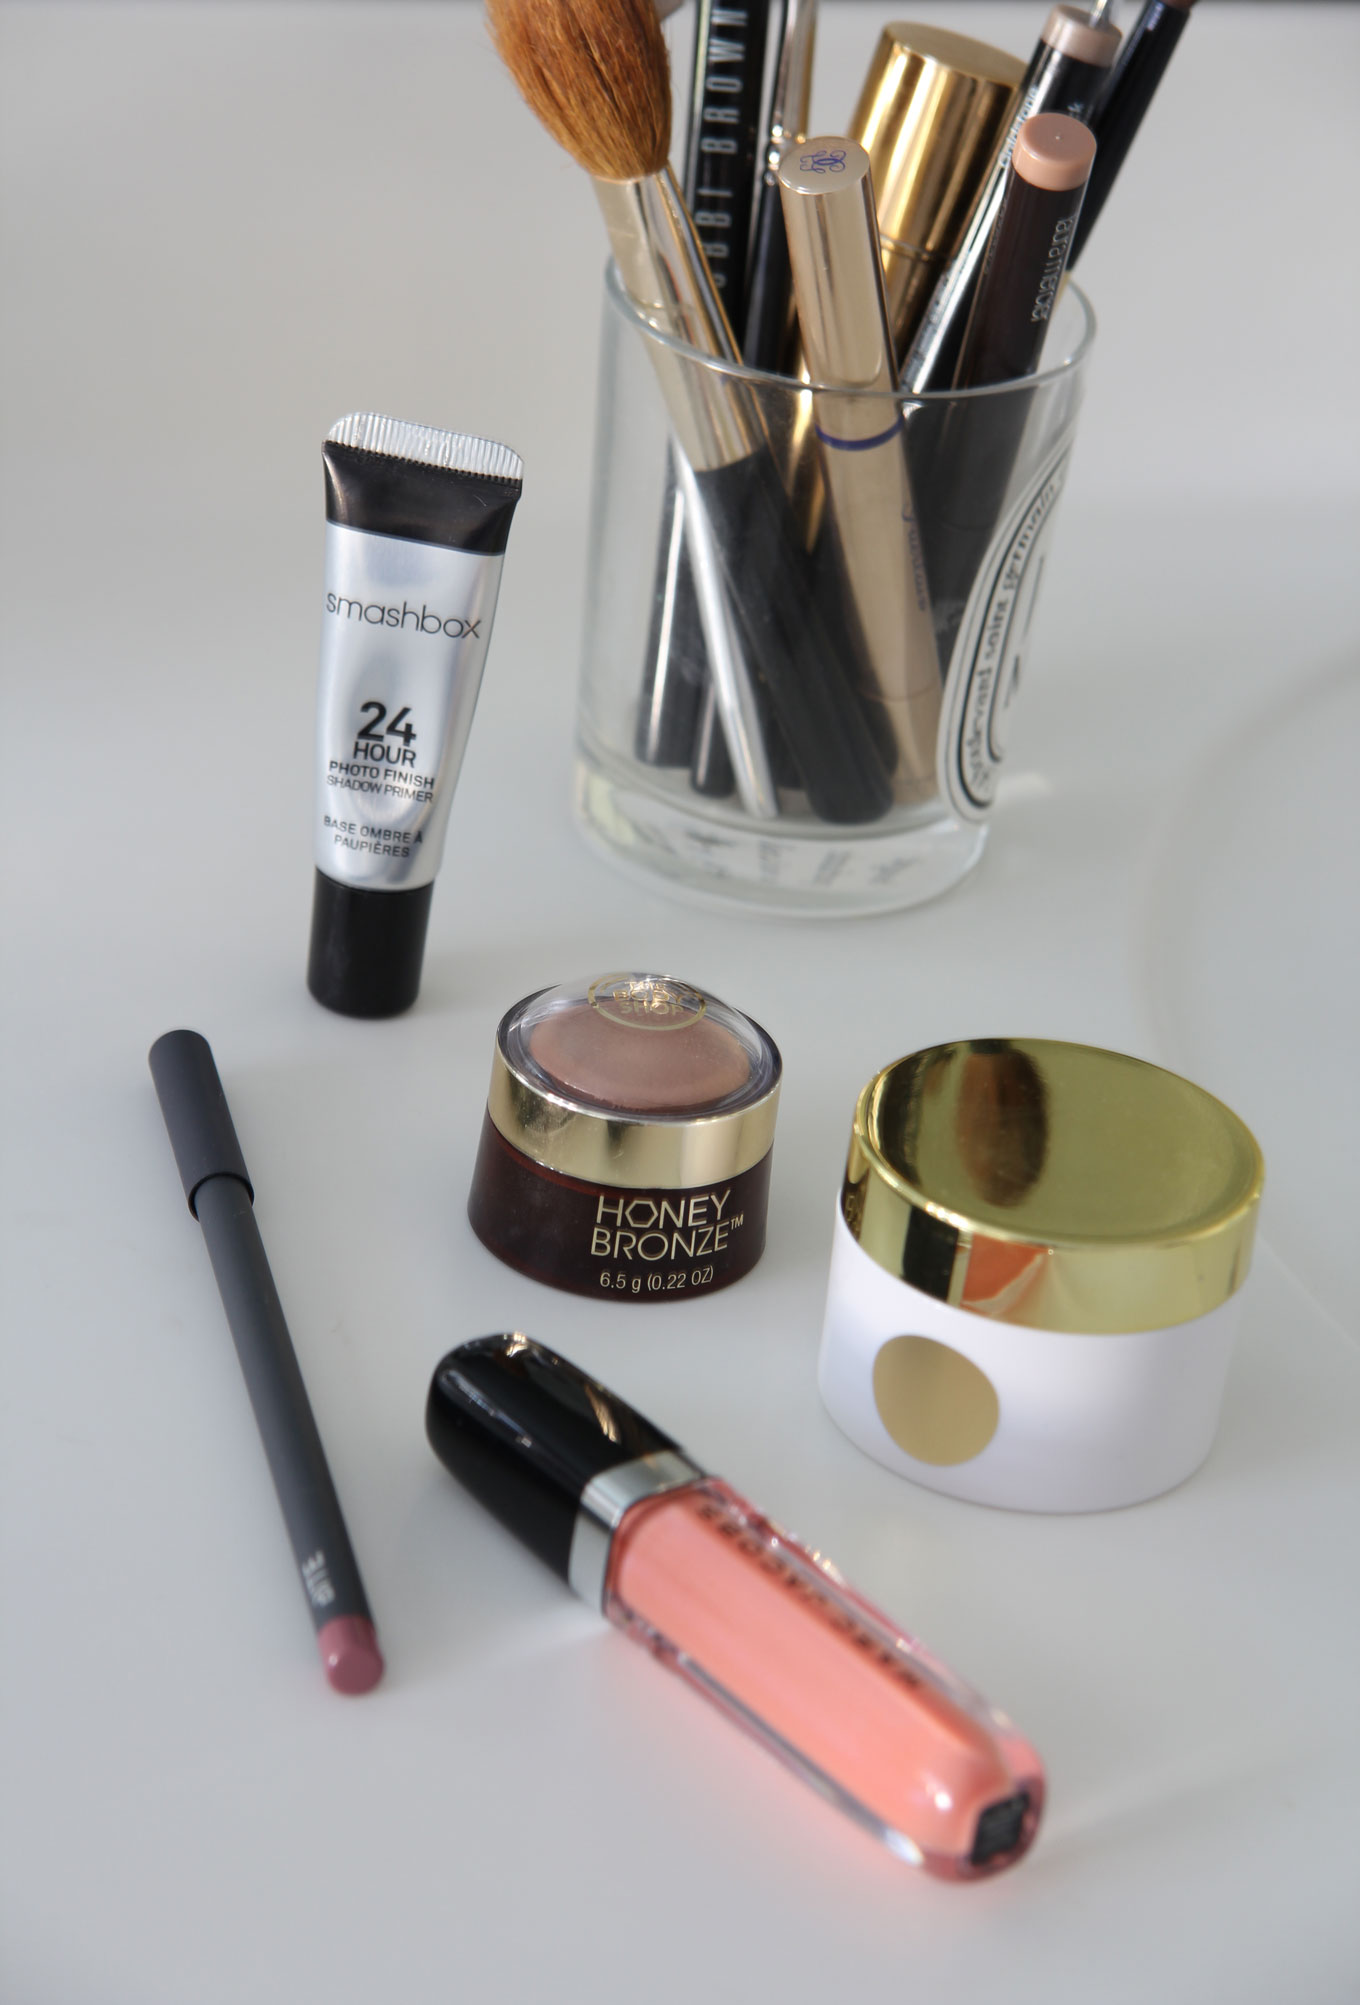 Ridgely Brode shares 5 things from her beauty bag this month, including two lip products and a great highlighter on her blog Ridgely's Radar.